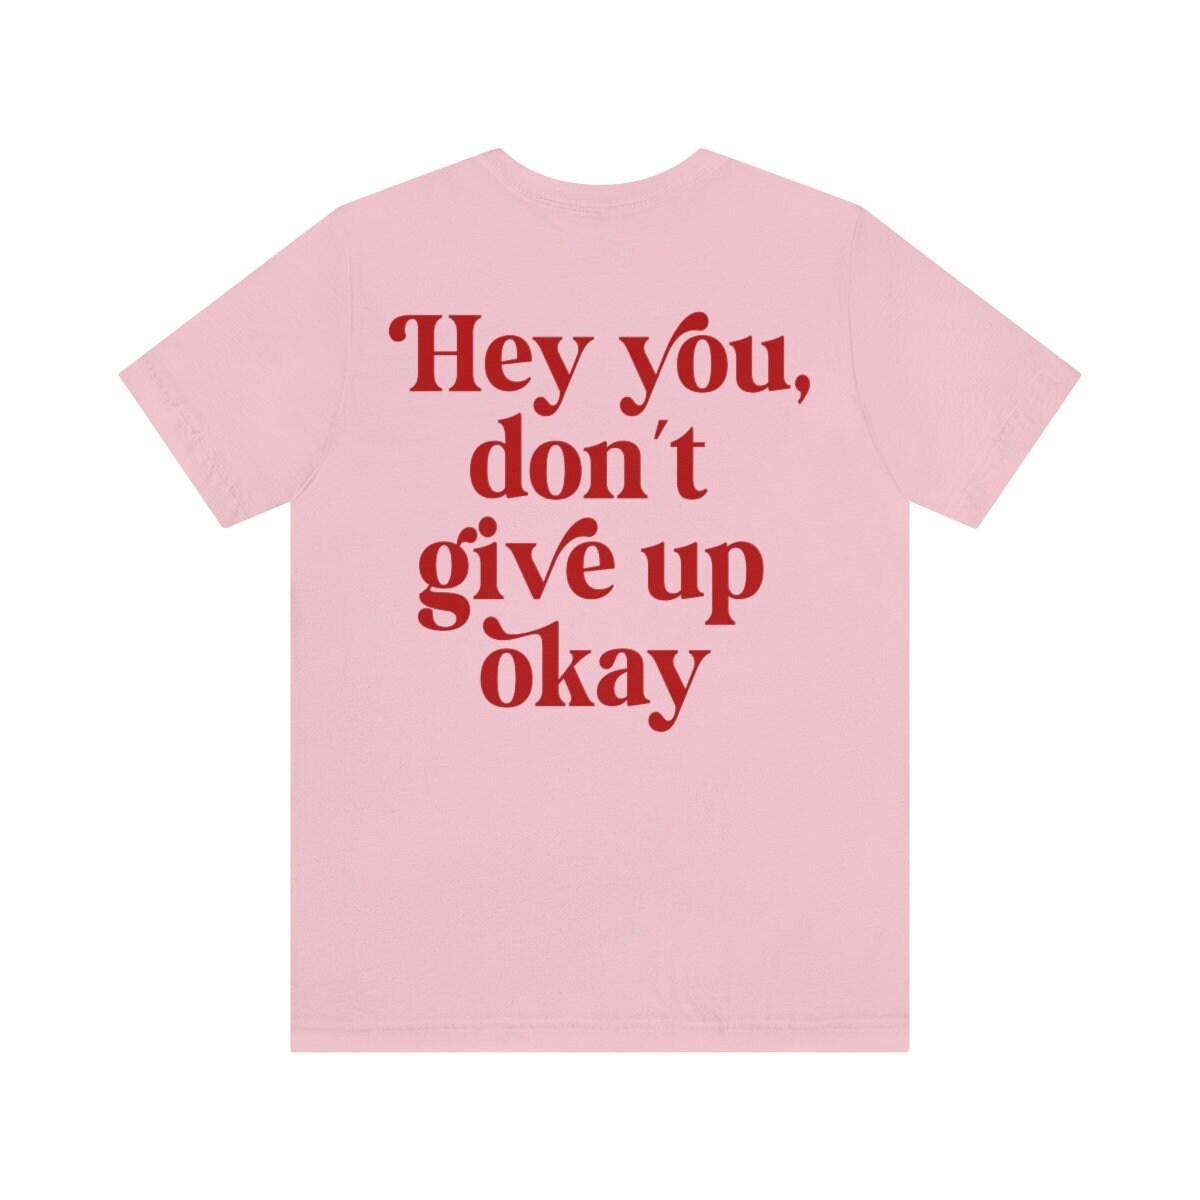 Hey you, don't give up okay